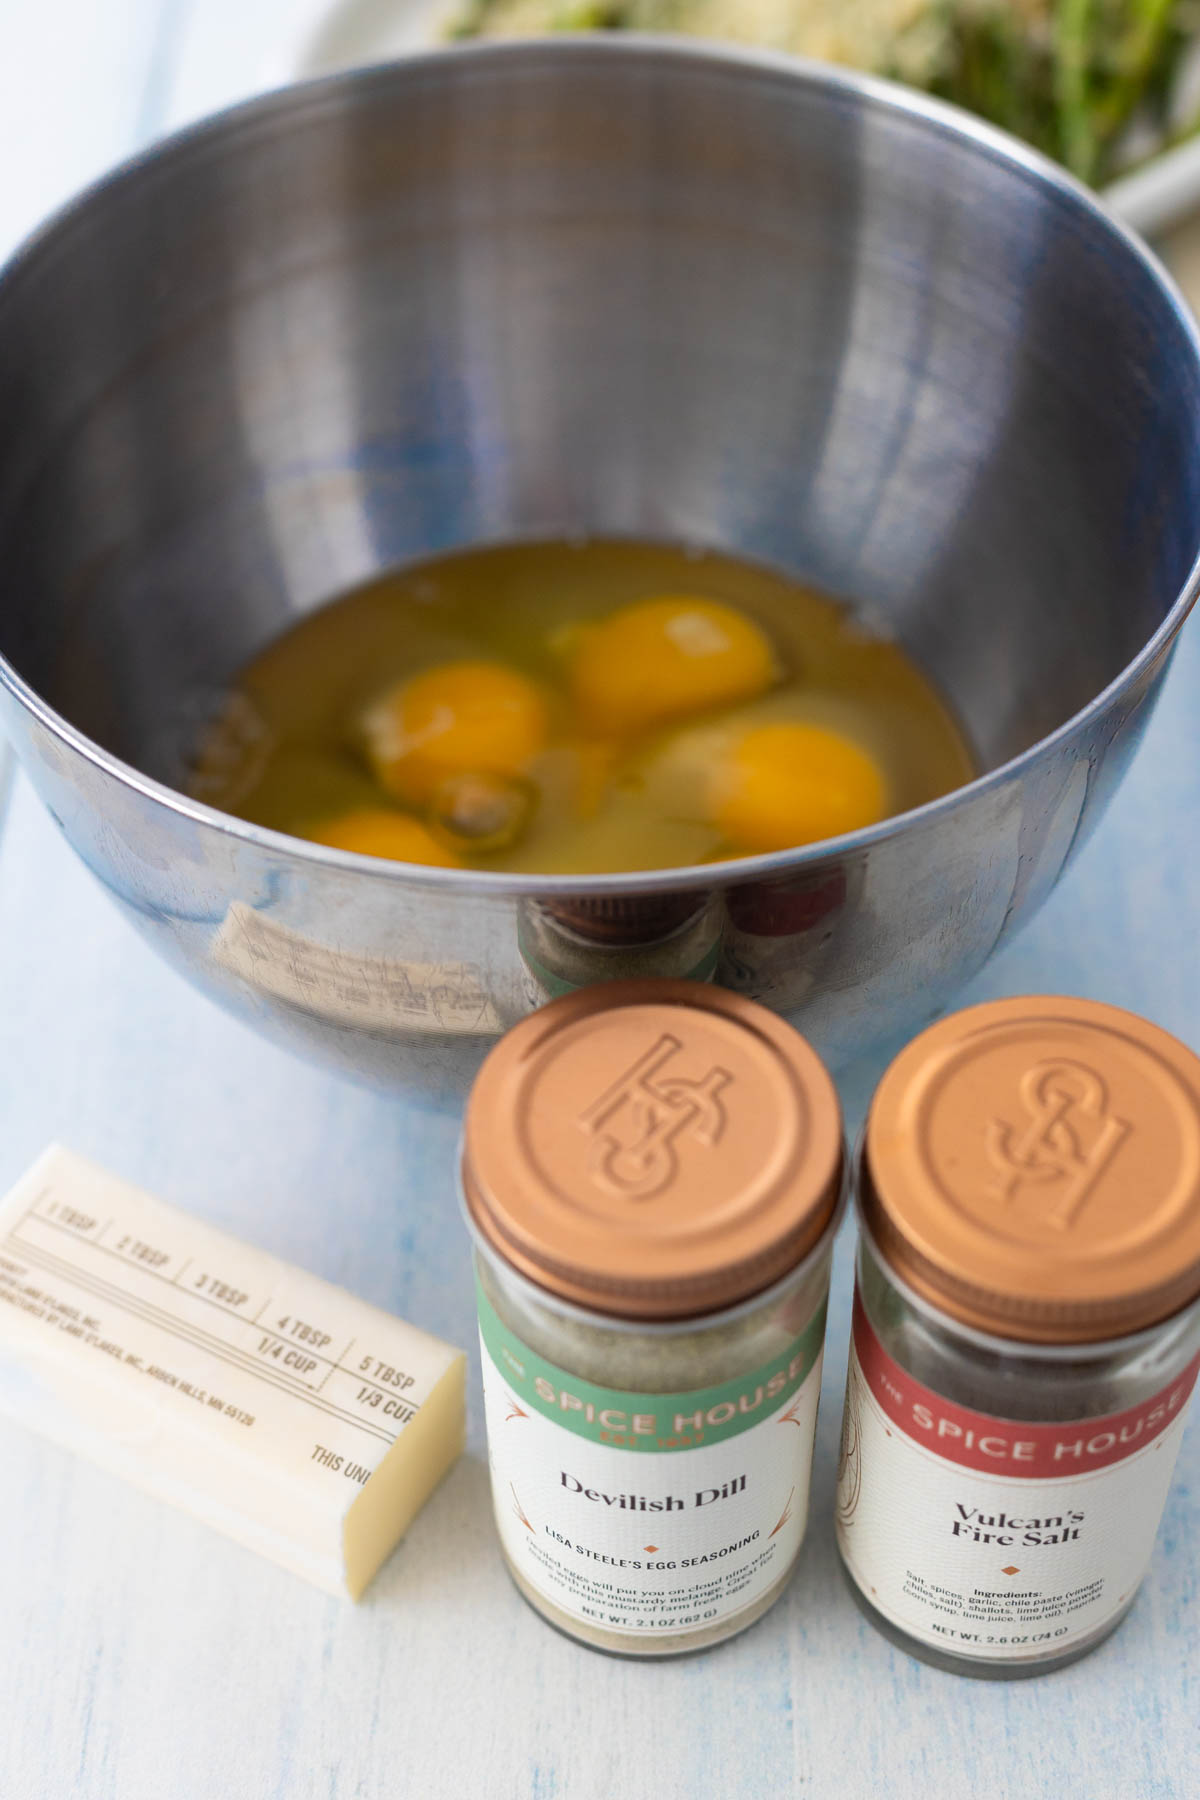 The eggs have been cracked into a mixing bowl that sits next to a stick of butter and two jars of spices.